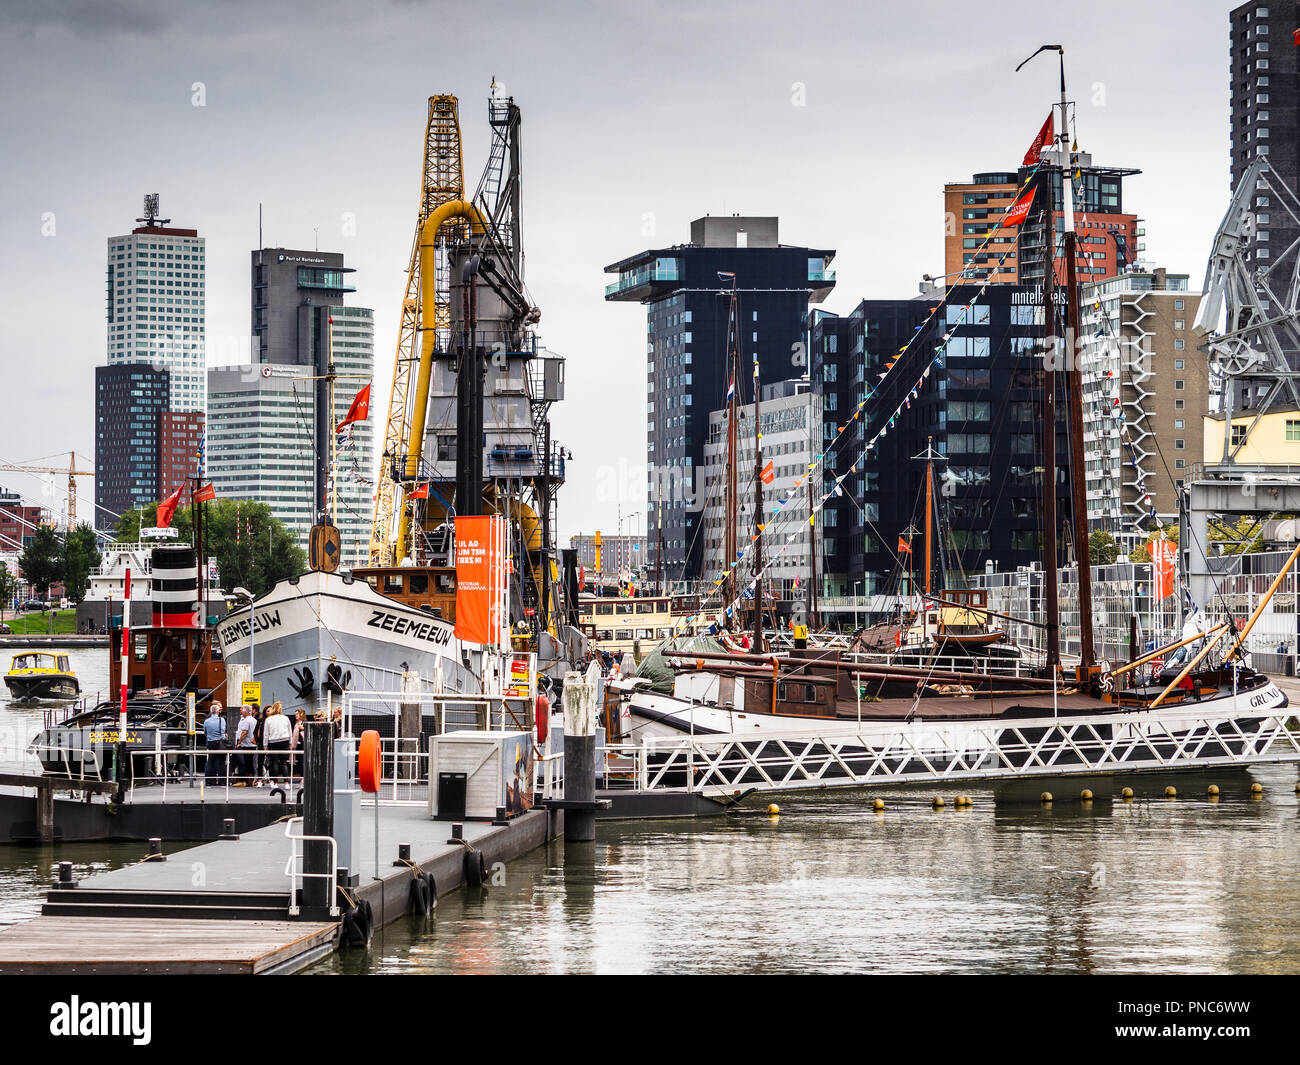 Rotterdam Maritime Museum - the Maritime Museum Harbour in central Rotterdam housing historic boats and artefacts Stock Photo